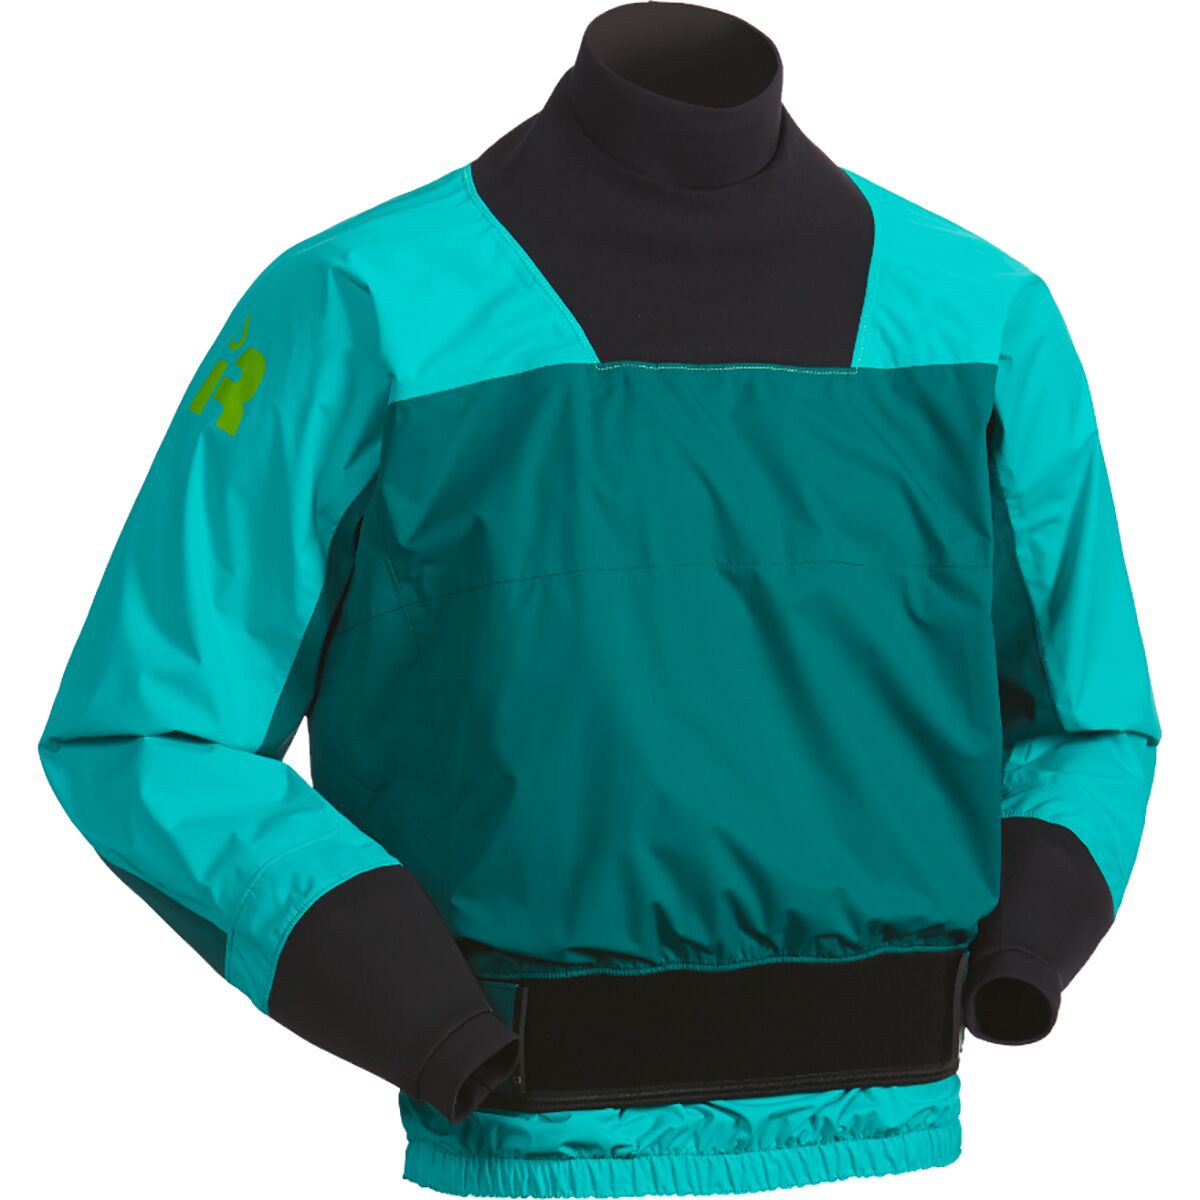 Immersion Research Rival Long-Sleeve Paddle Jacket - Men's